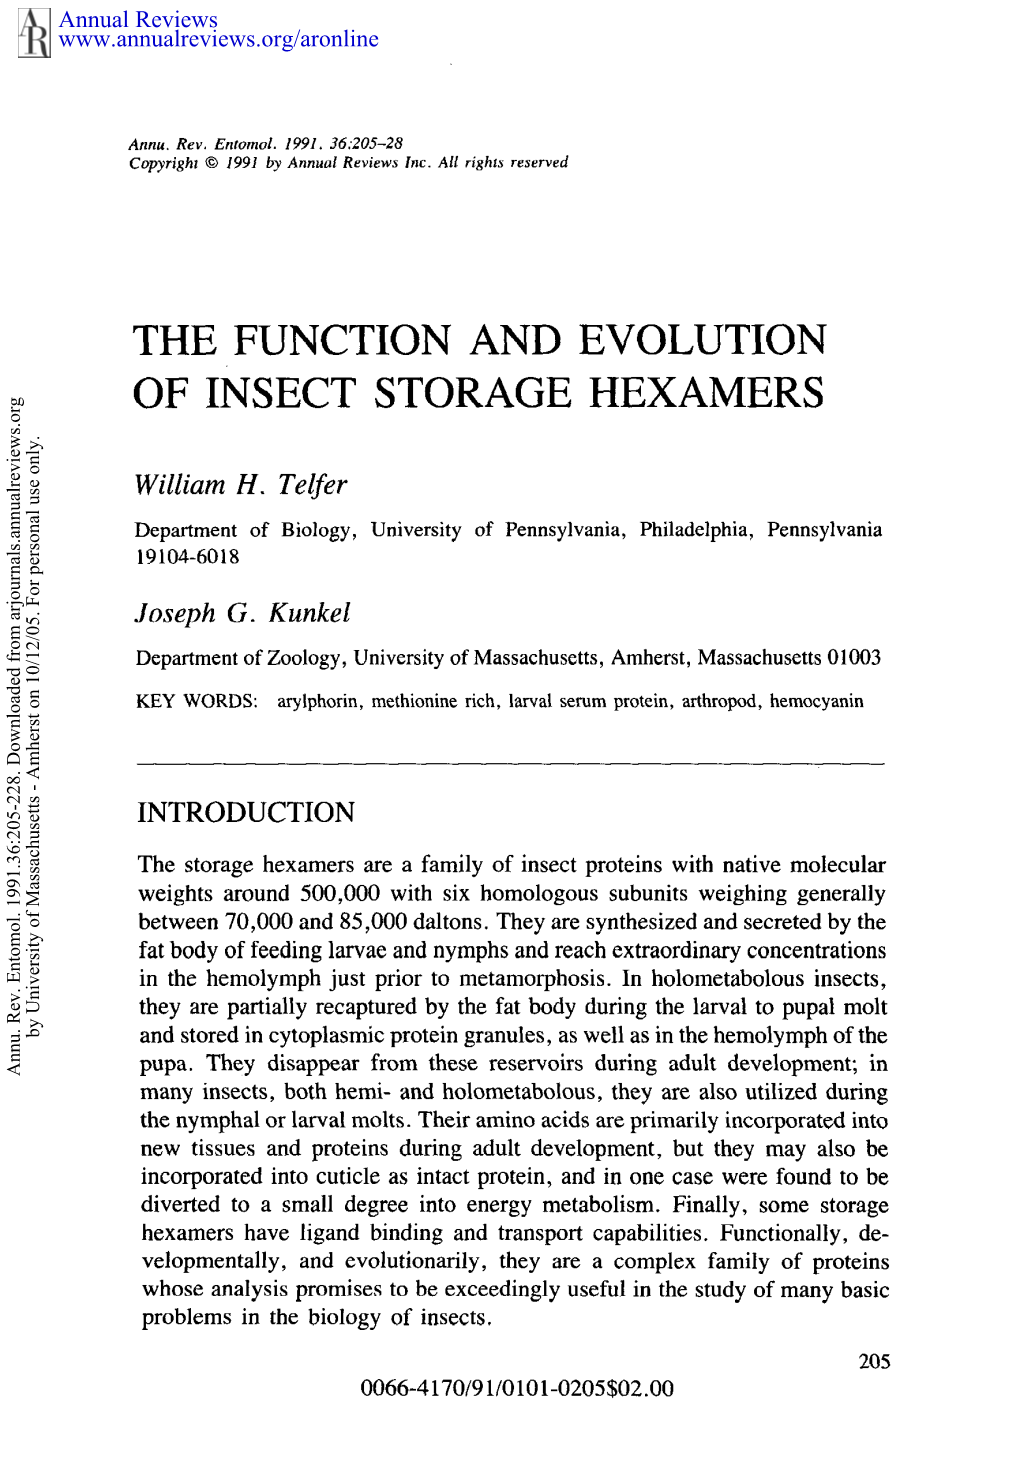 The Function and Evolution of Insect Storage Hexamers